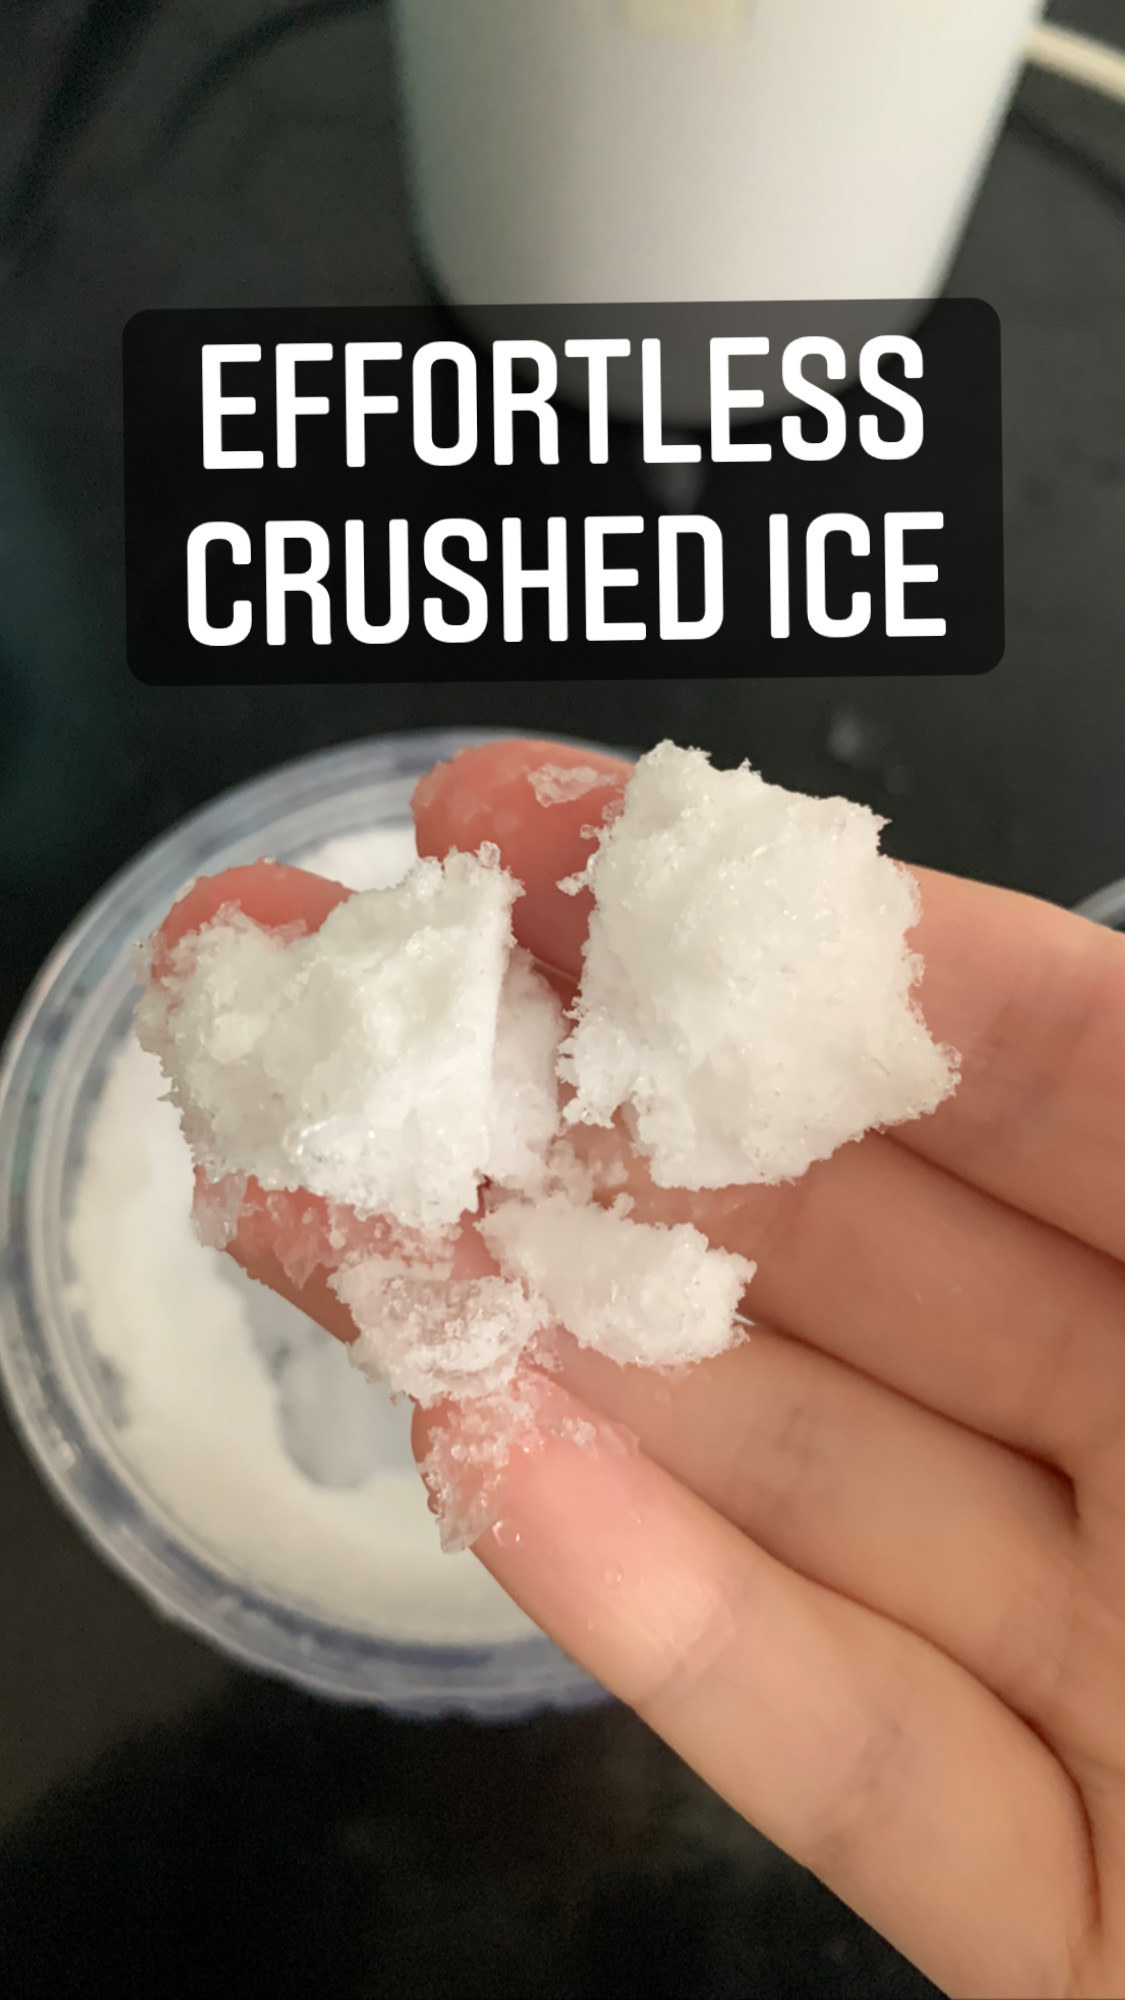 My hand holding a couple of tablespoons of crushed ice